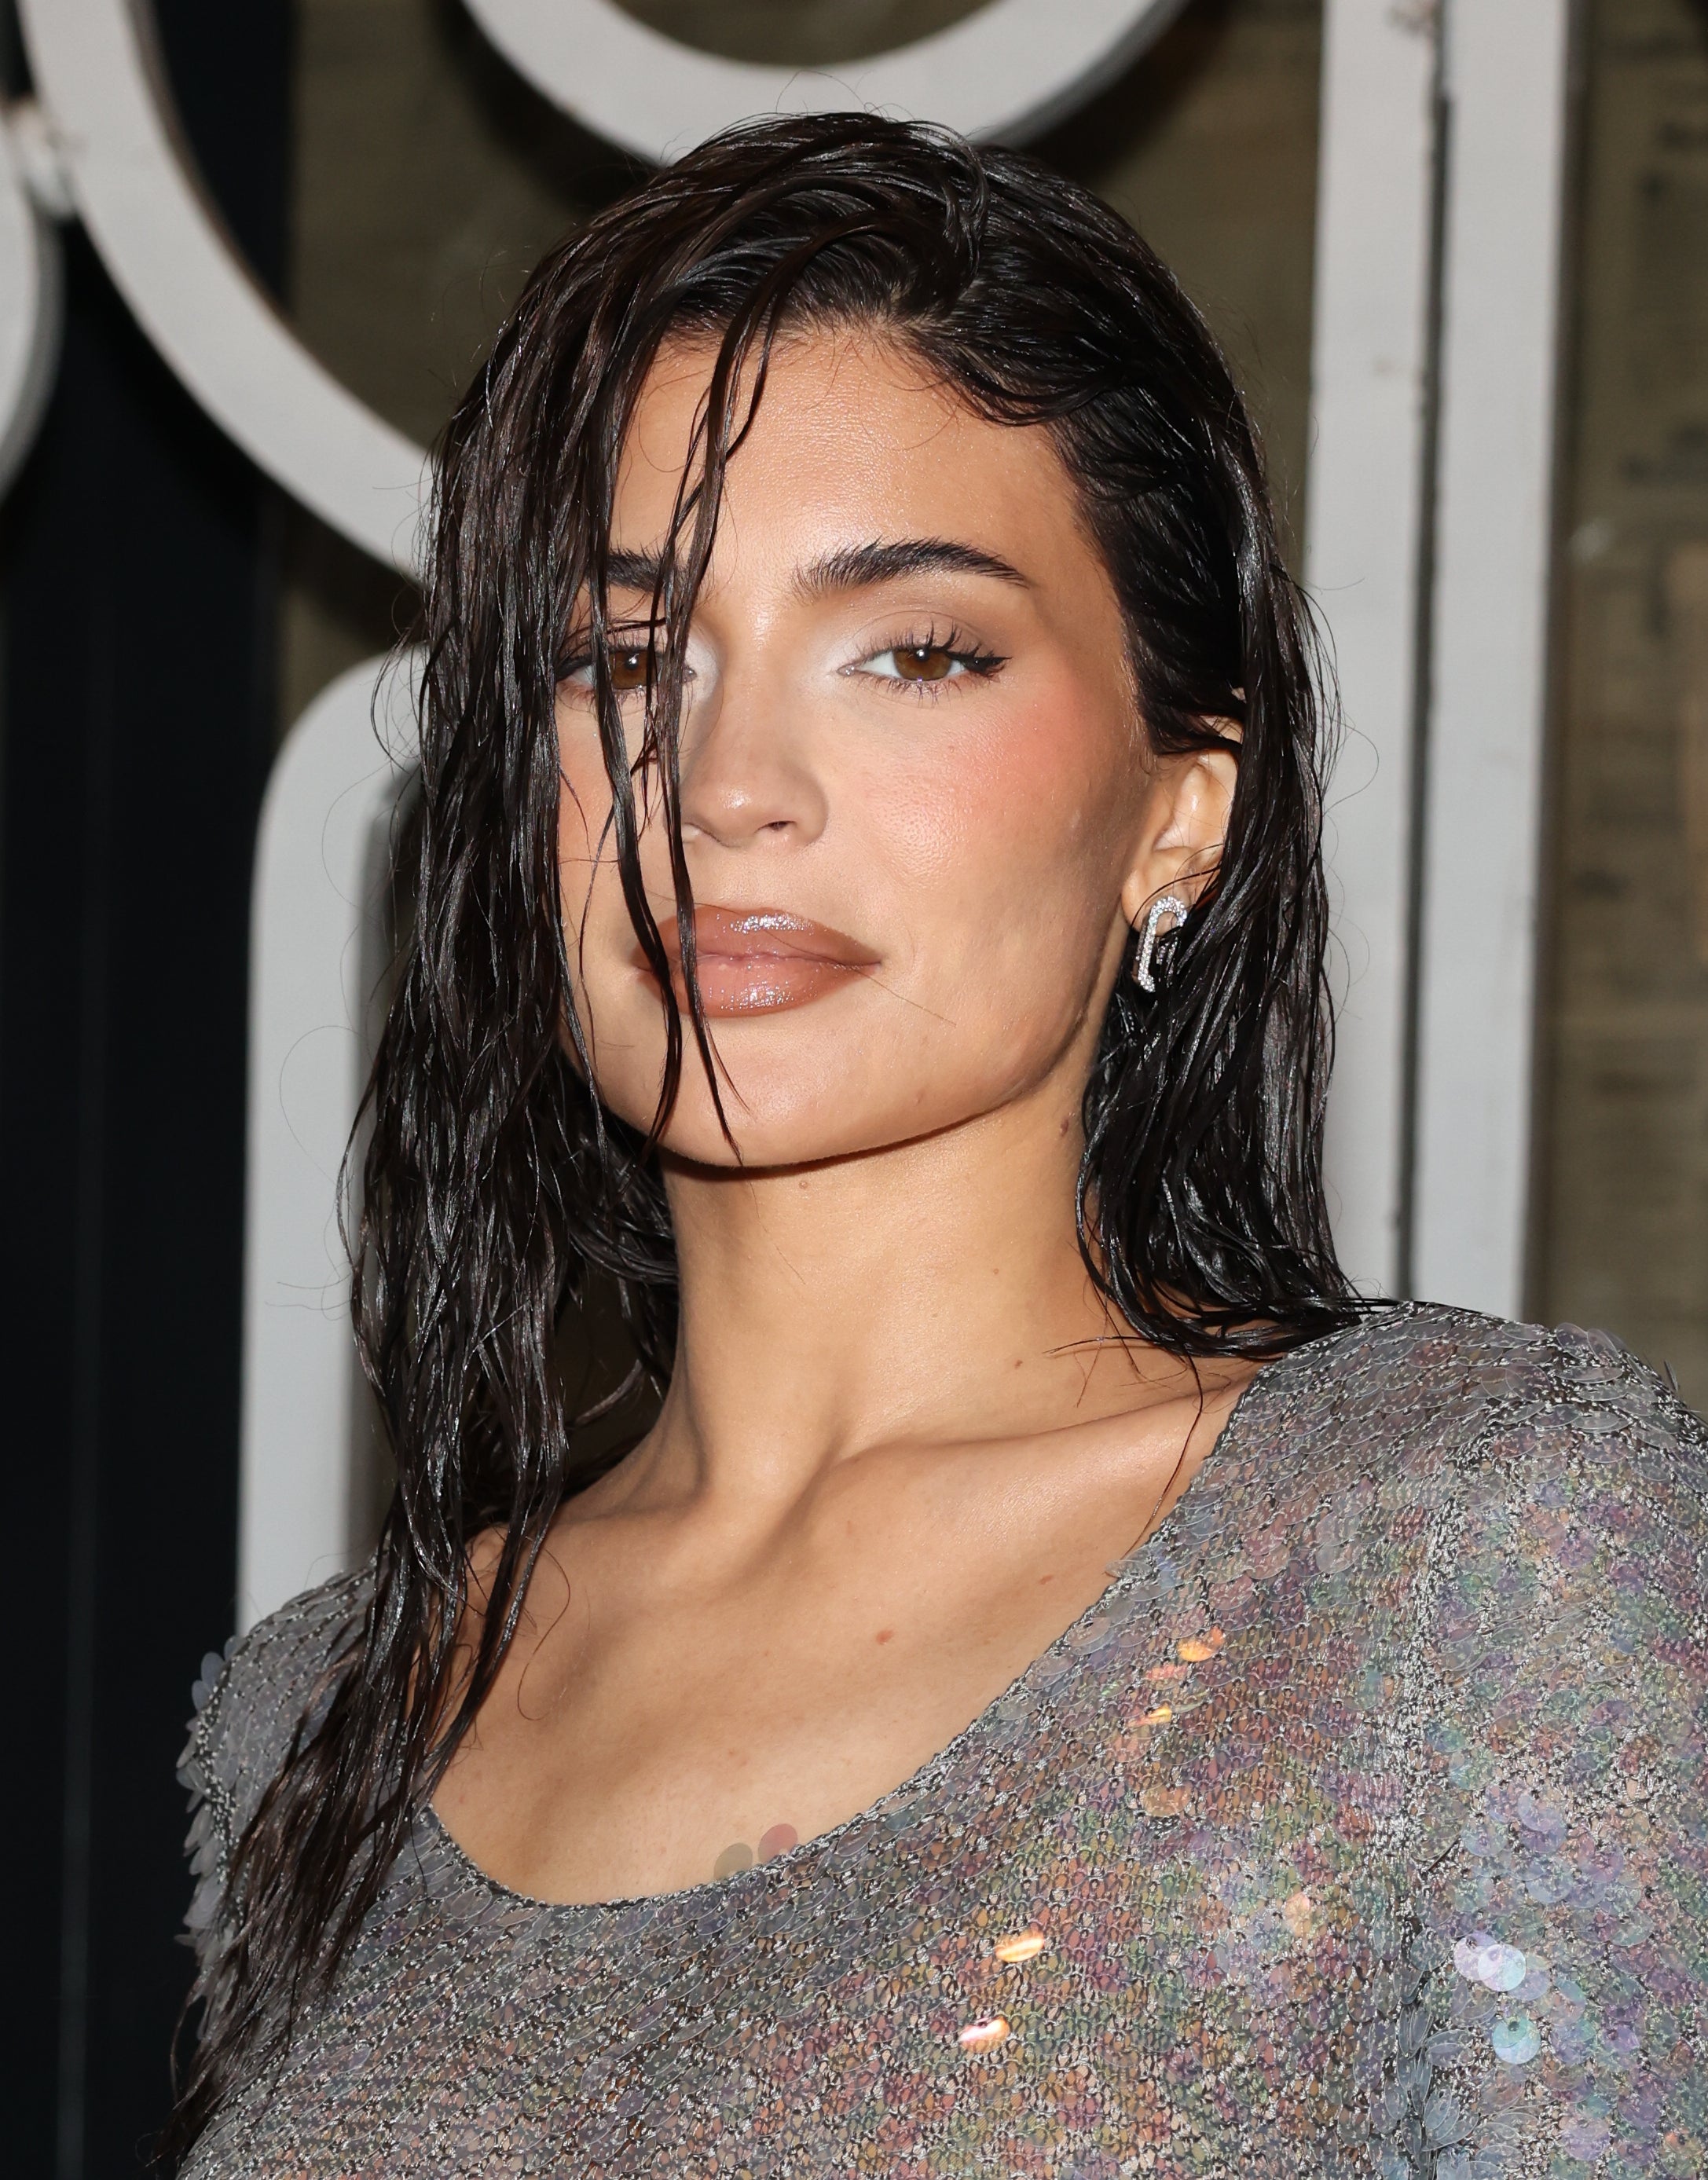 Kylie Jenner in sequined dress posing at an event